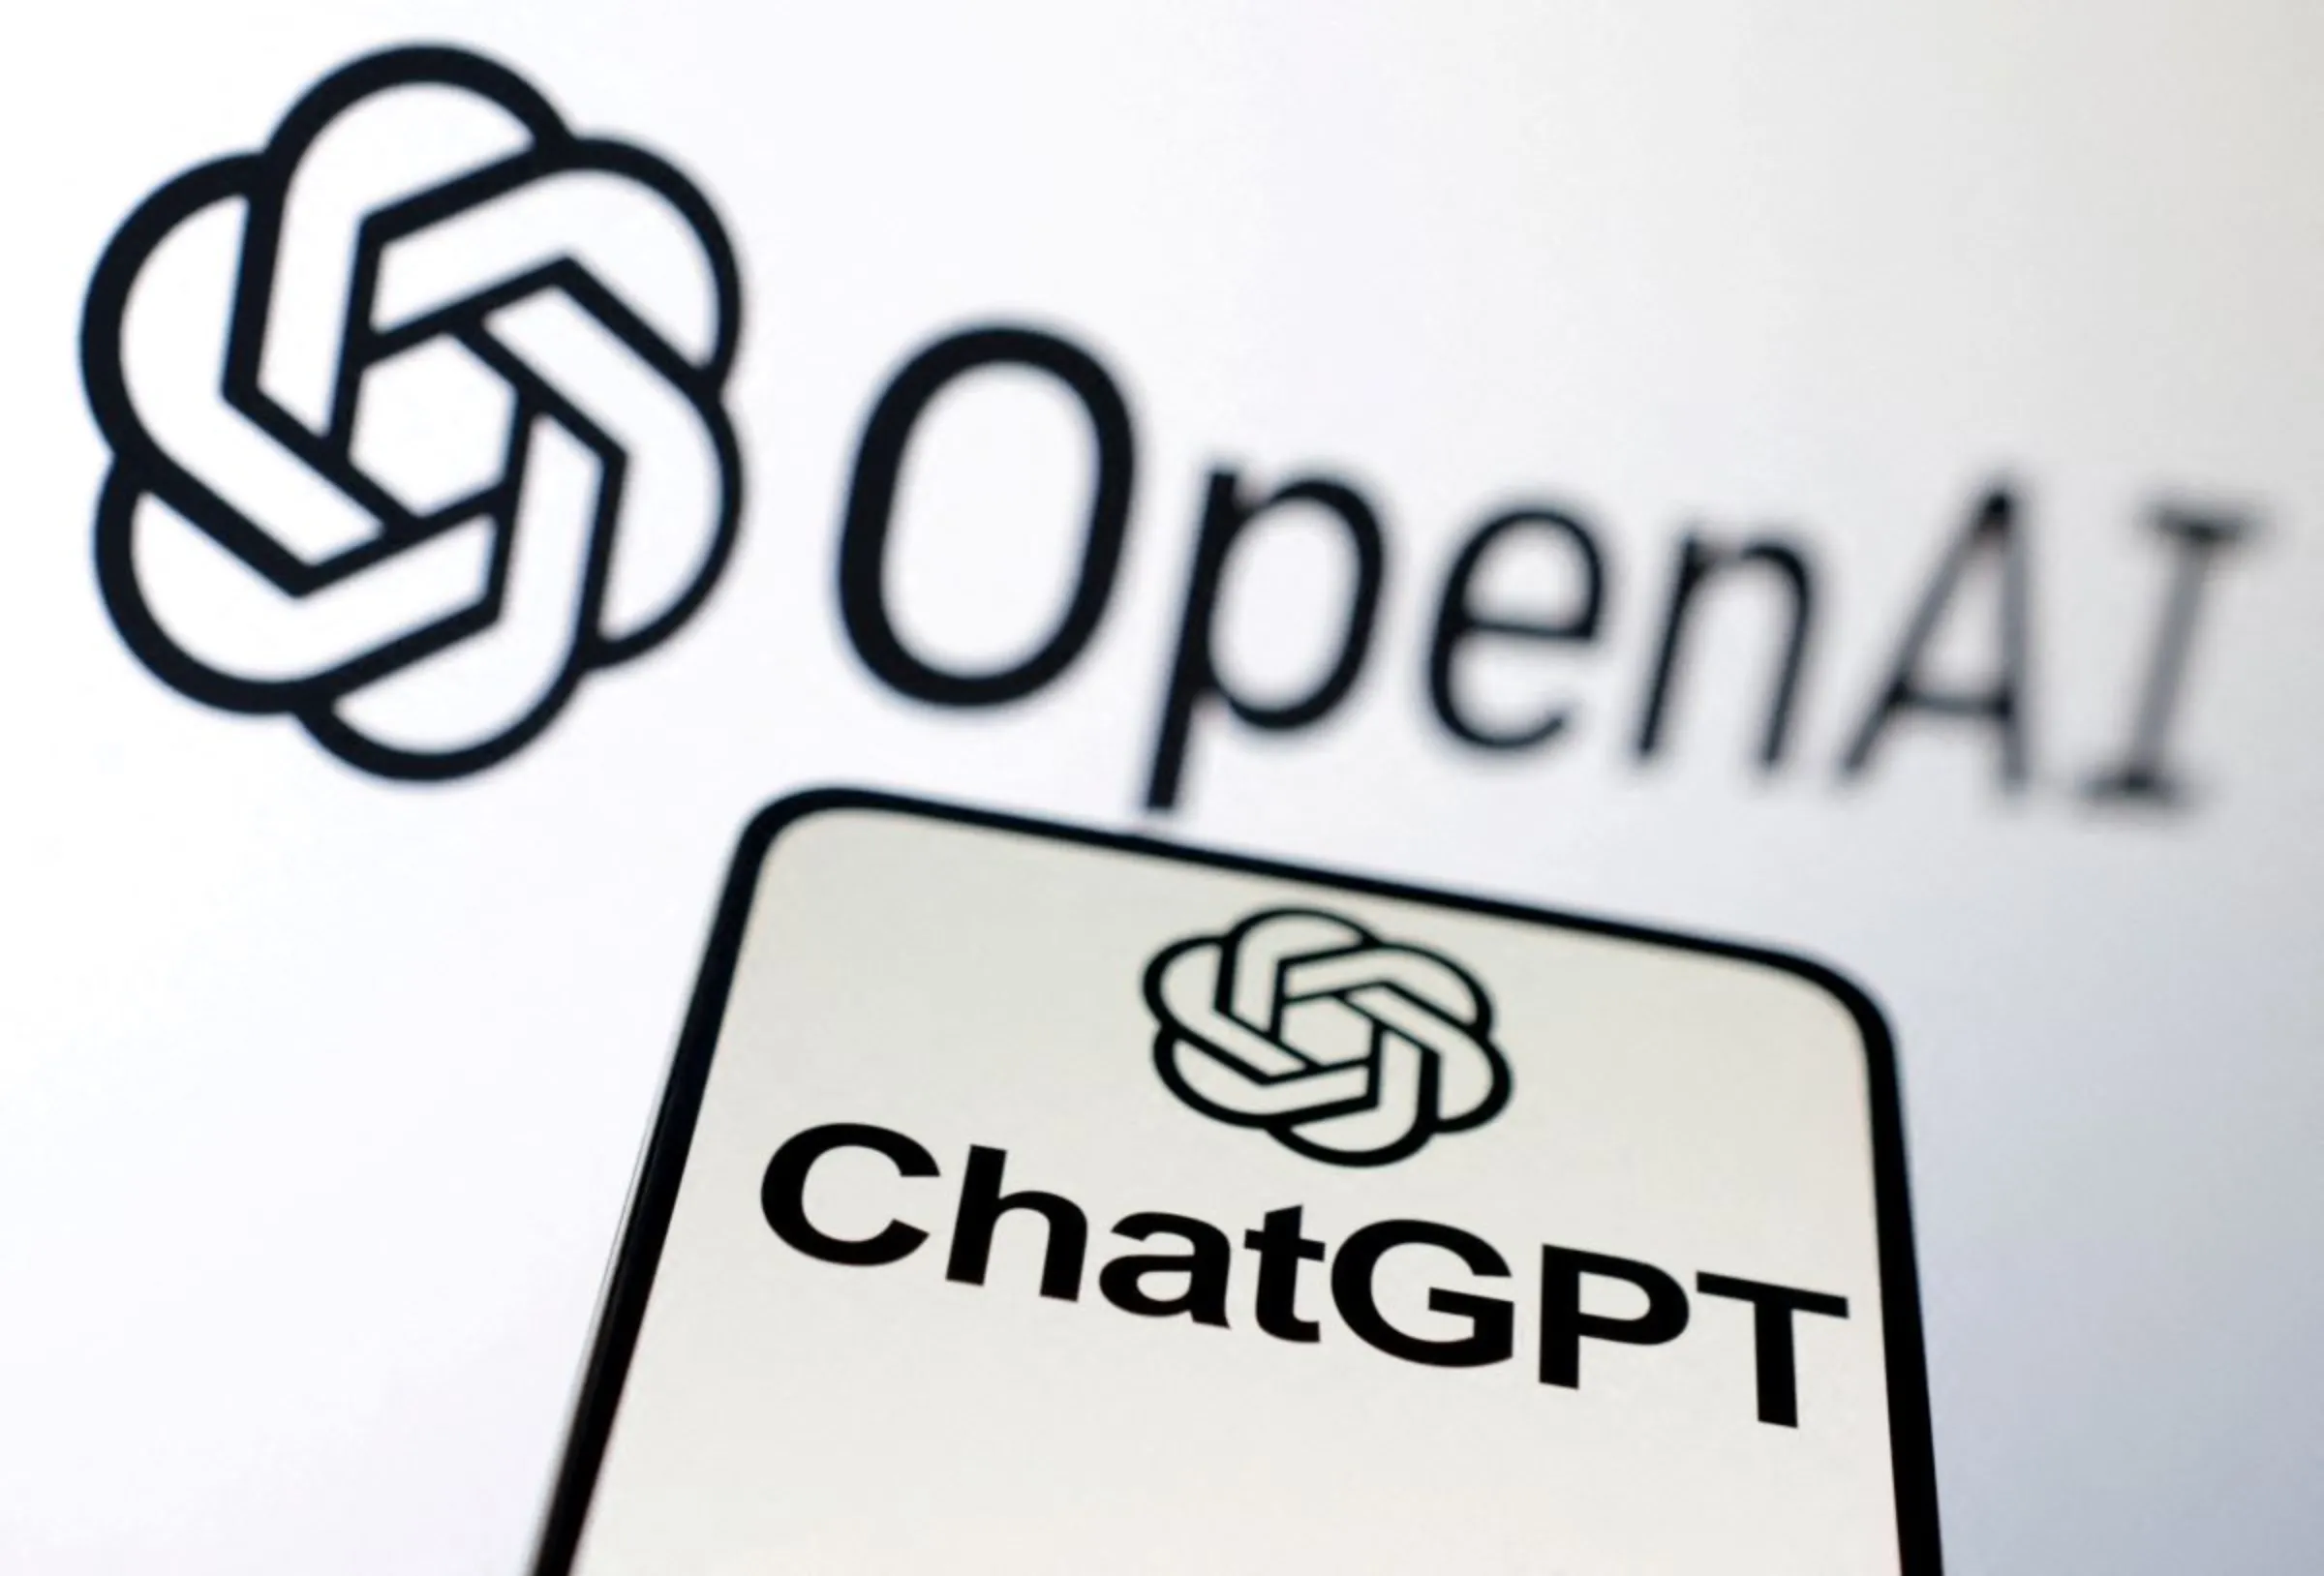 OpenAI and ChatGPT logos are seen in this illustration taken, February 3, 2023. REUTERS/Dado Ruvic/Illustration